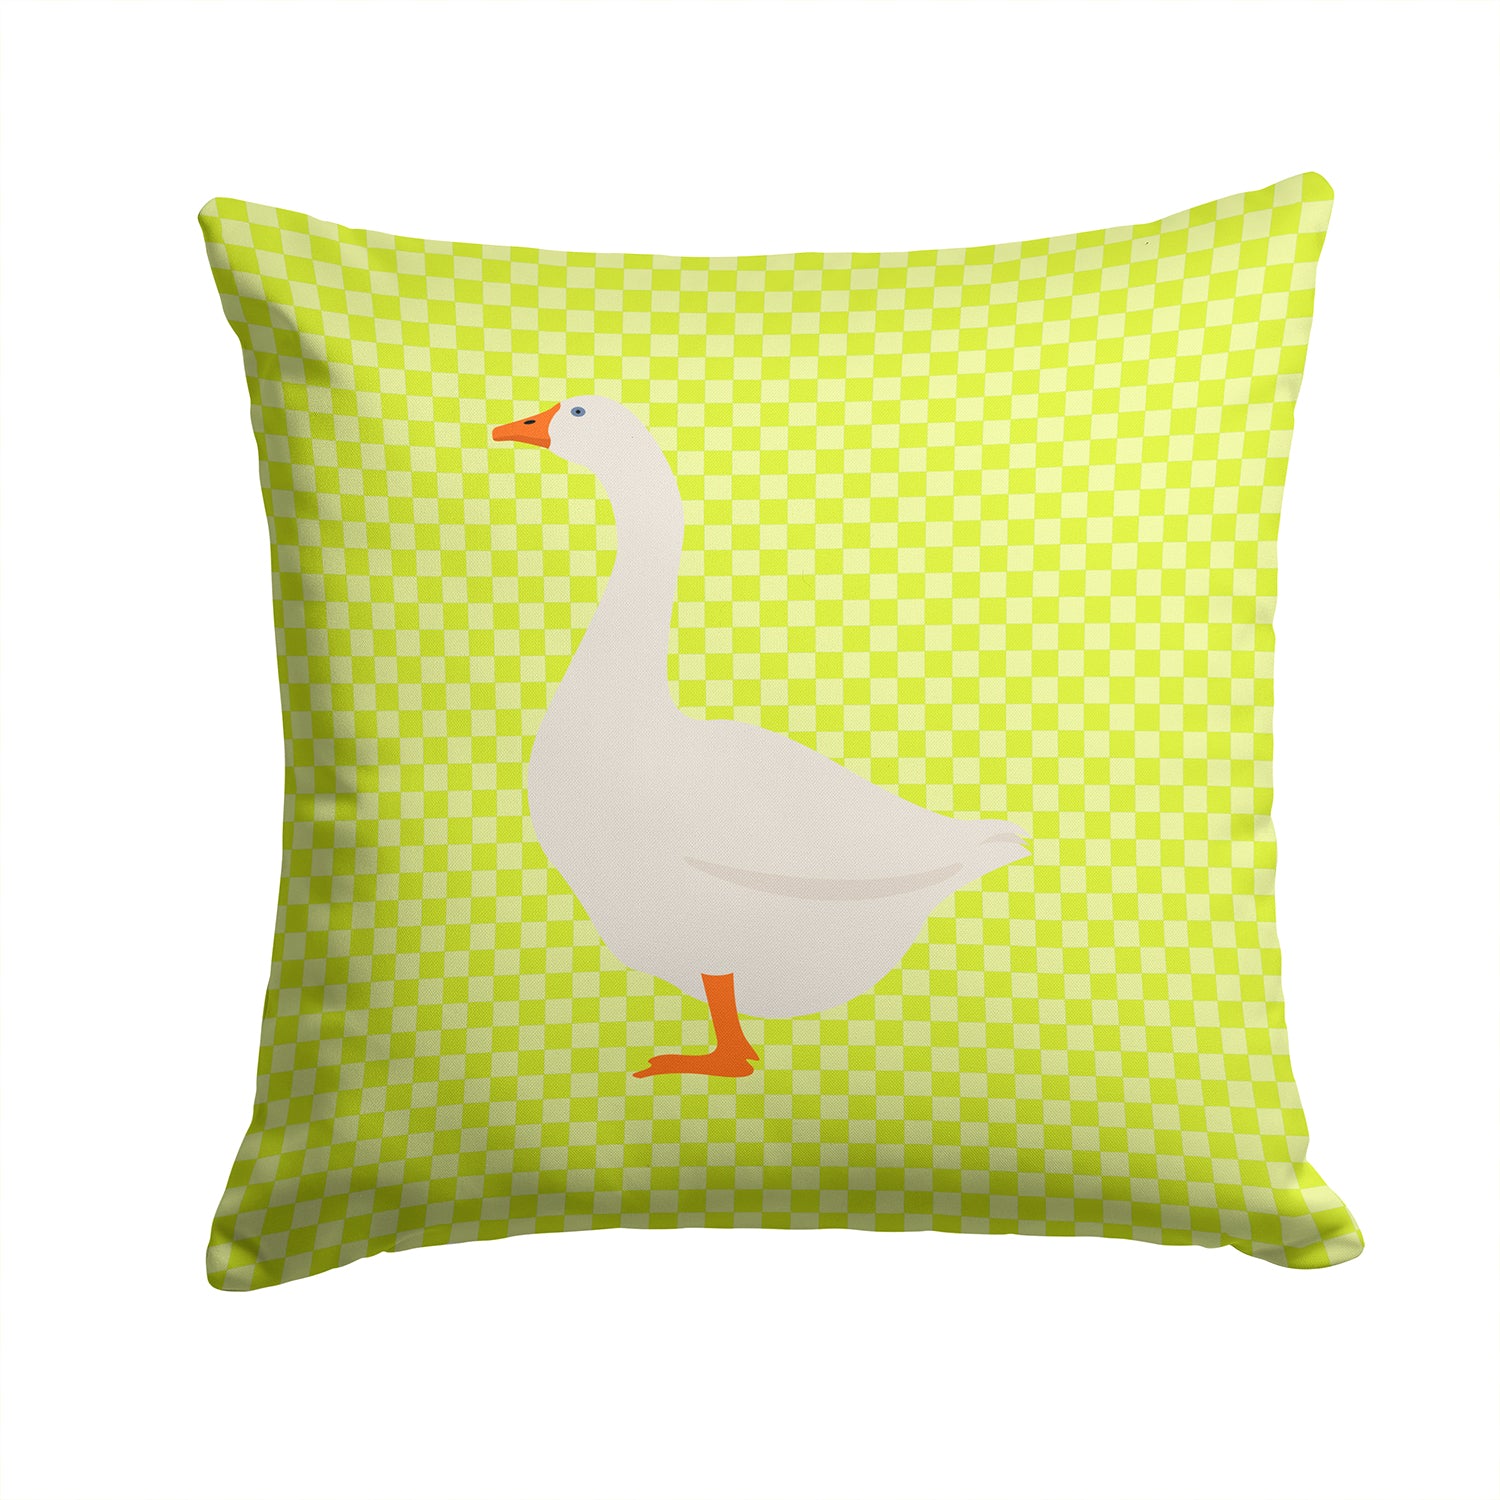 Embden Goose Green Fabric Decorative Pillow BB7718PW1414 - the-store.com